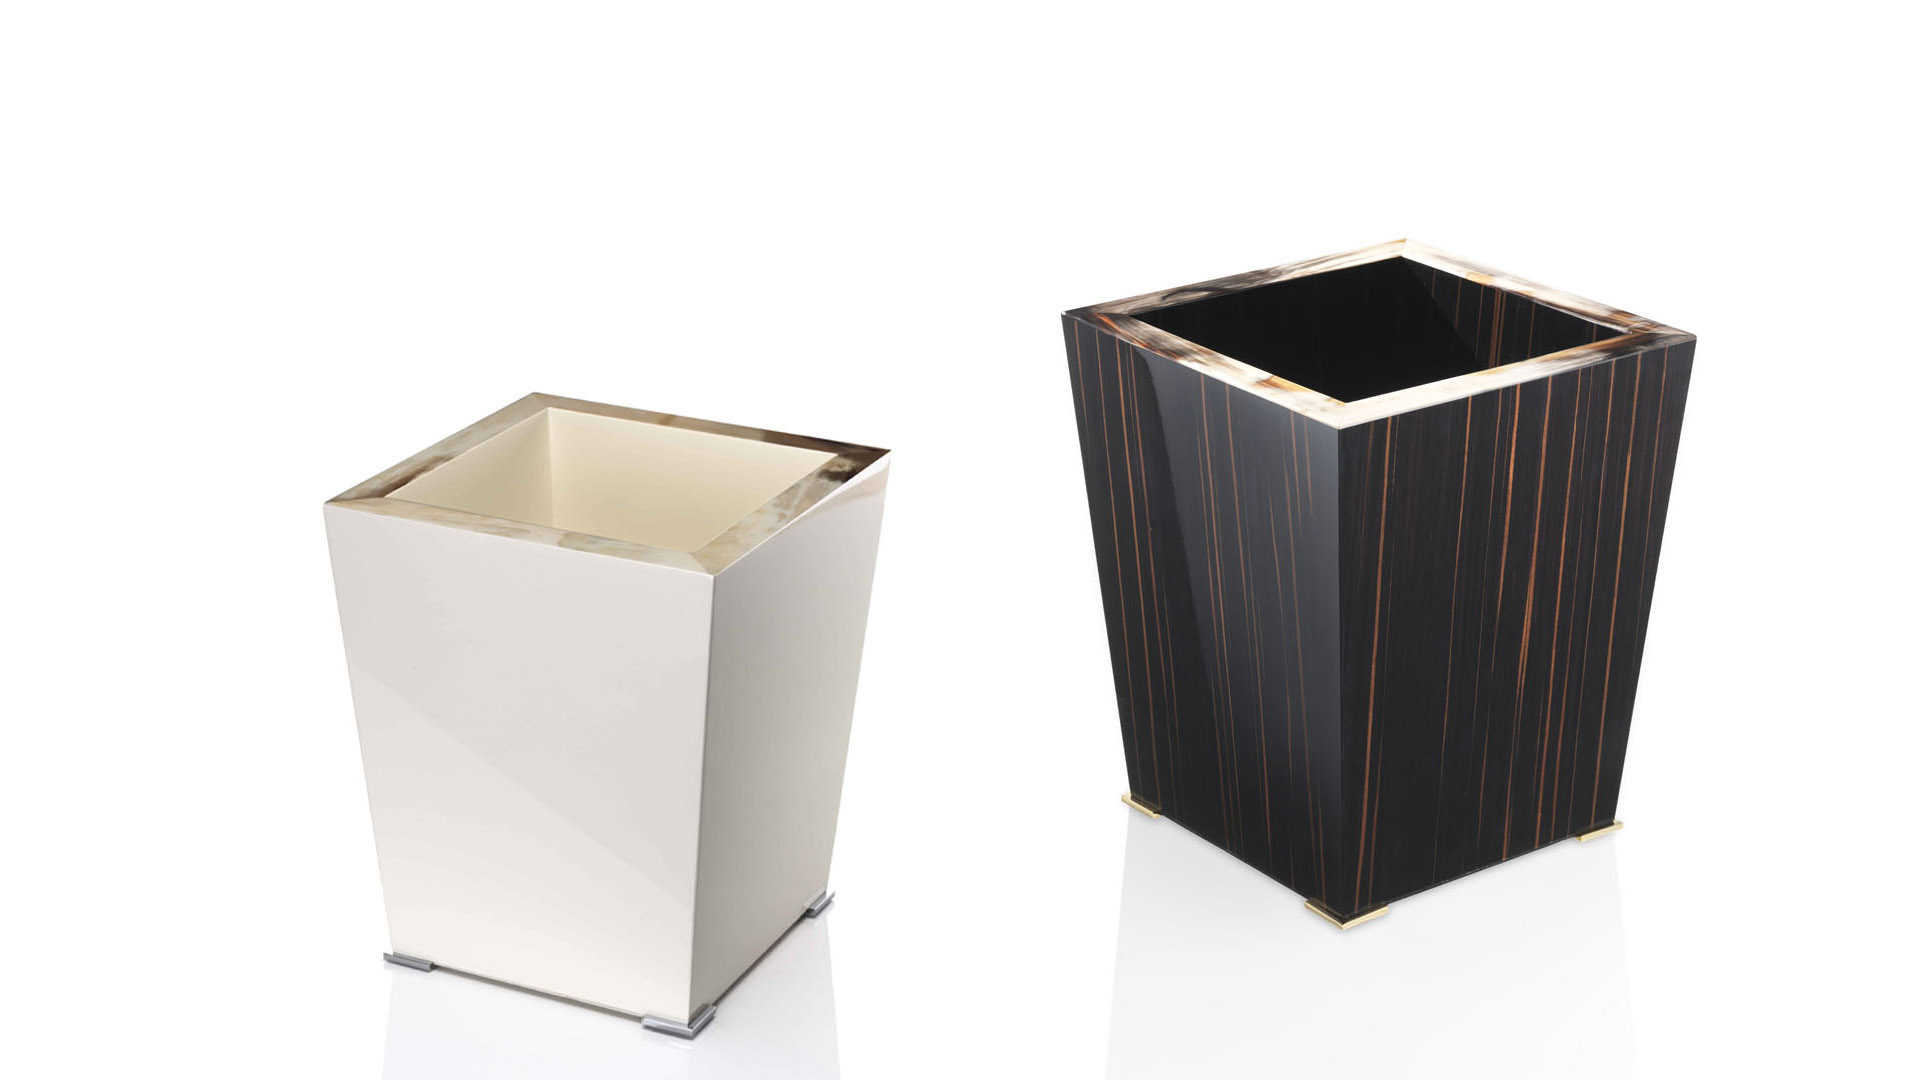 Bath sets - Fedro waste paper basket in wood and horn - cover - Arcahorn